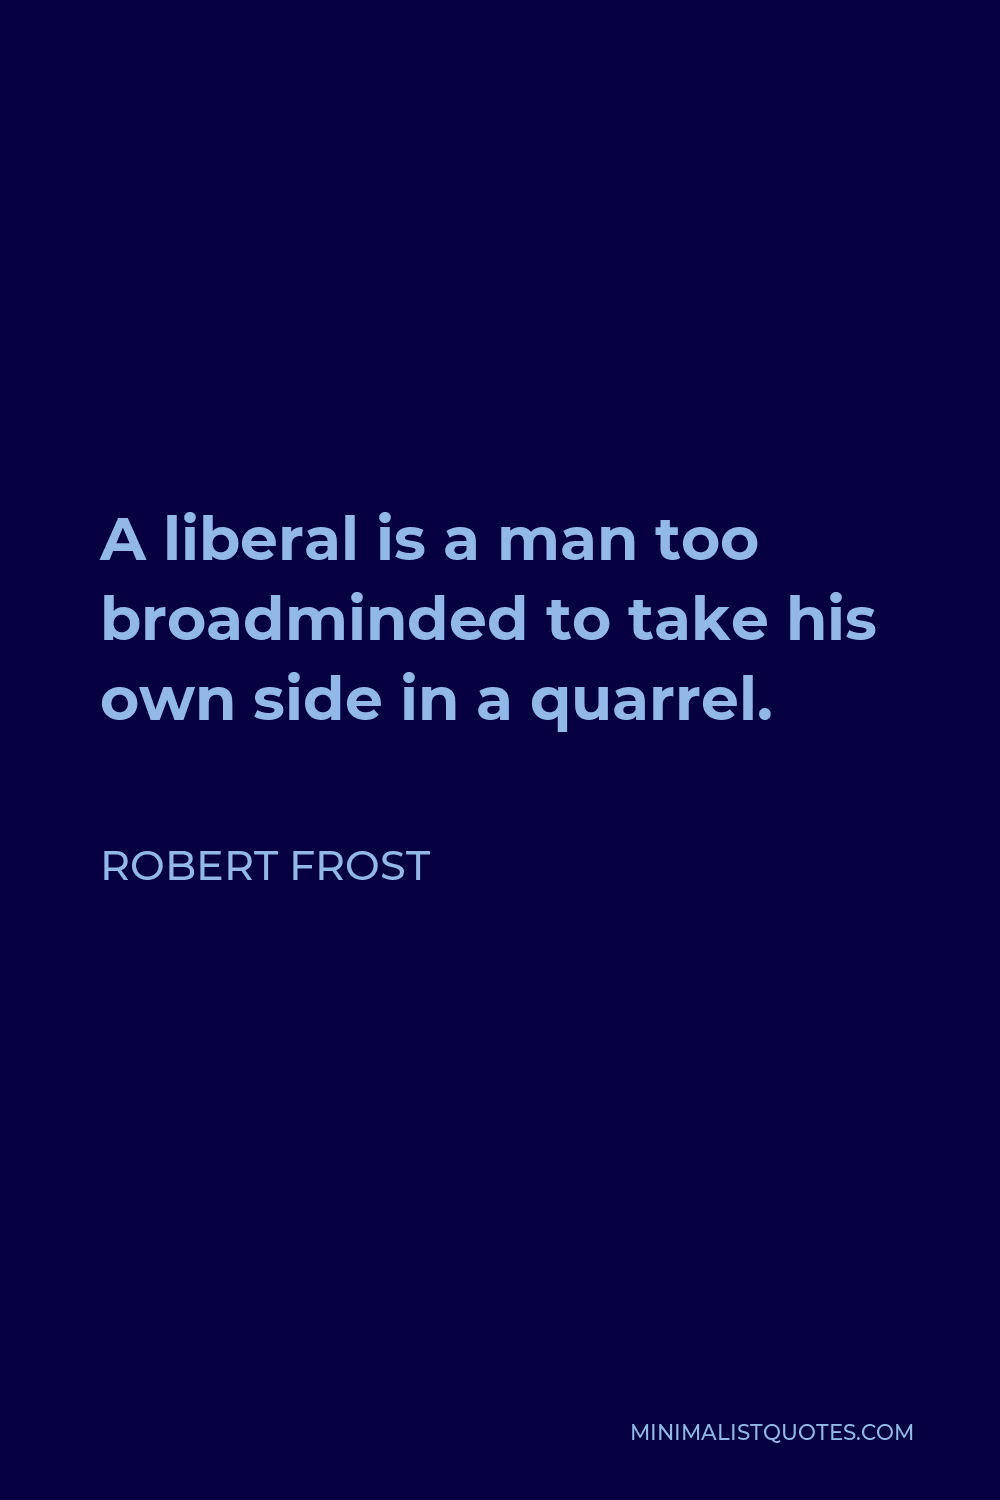 Robert Frost Quote - A liberal is a man too broadminded to take his own side in a quarrel.